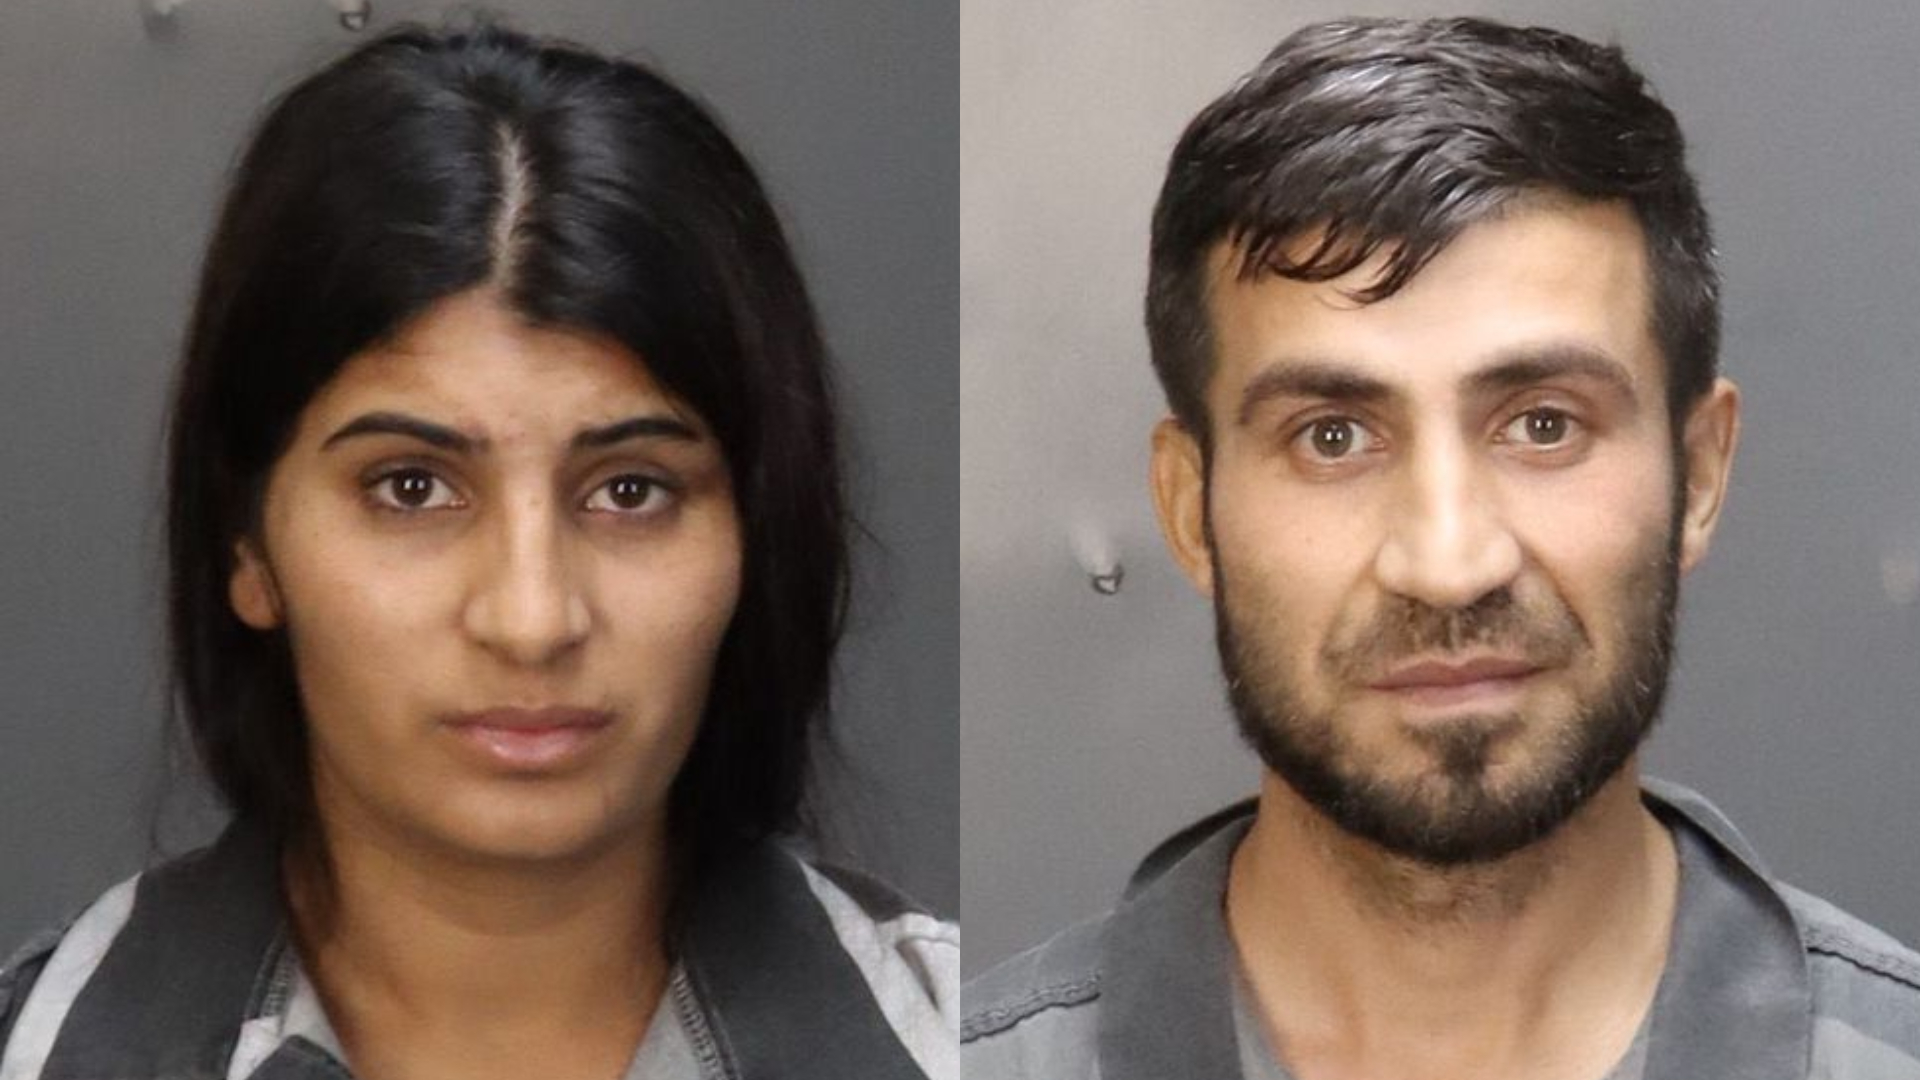 children leaving Waco thousands accused stores area Couple cosmetics behind from in stealing H-E-B in car while of